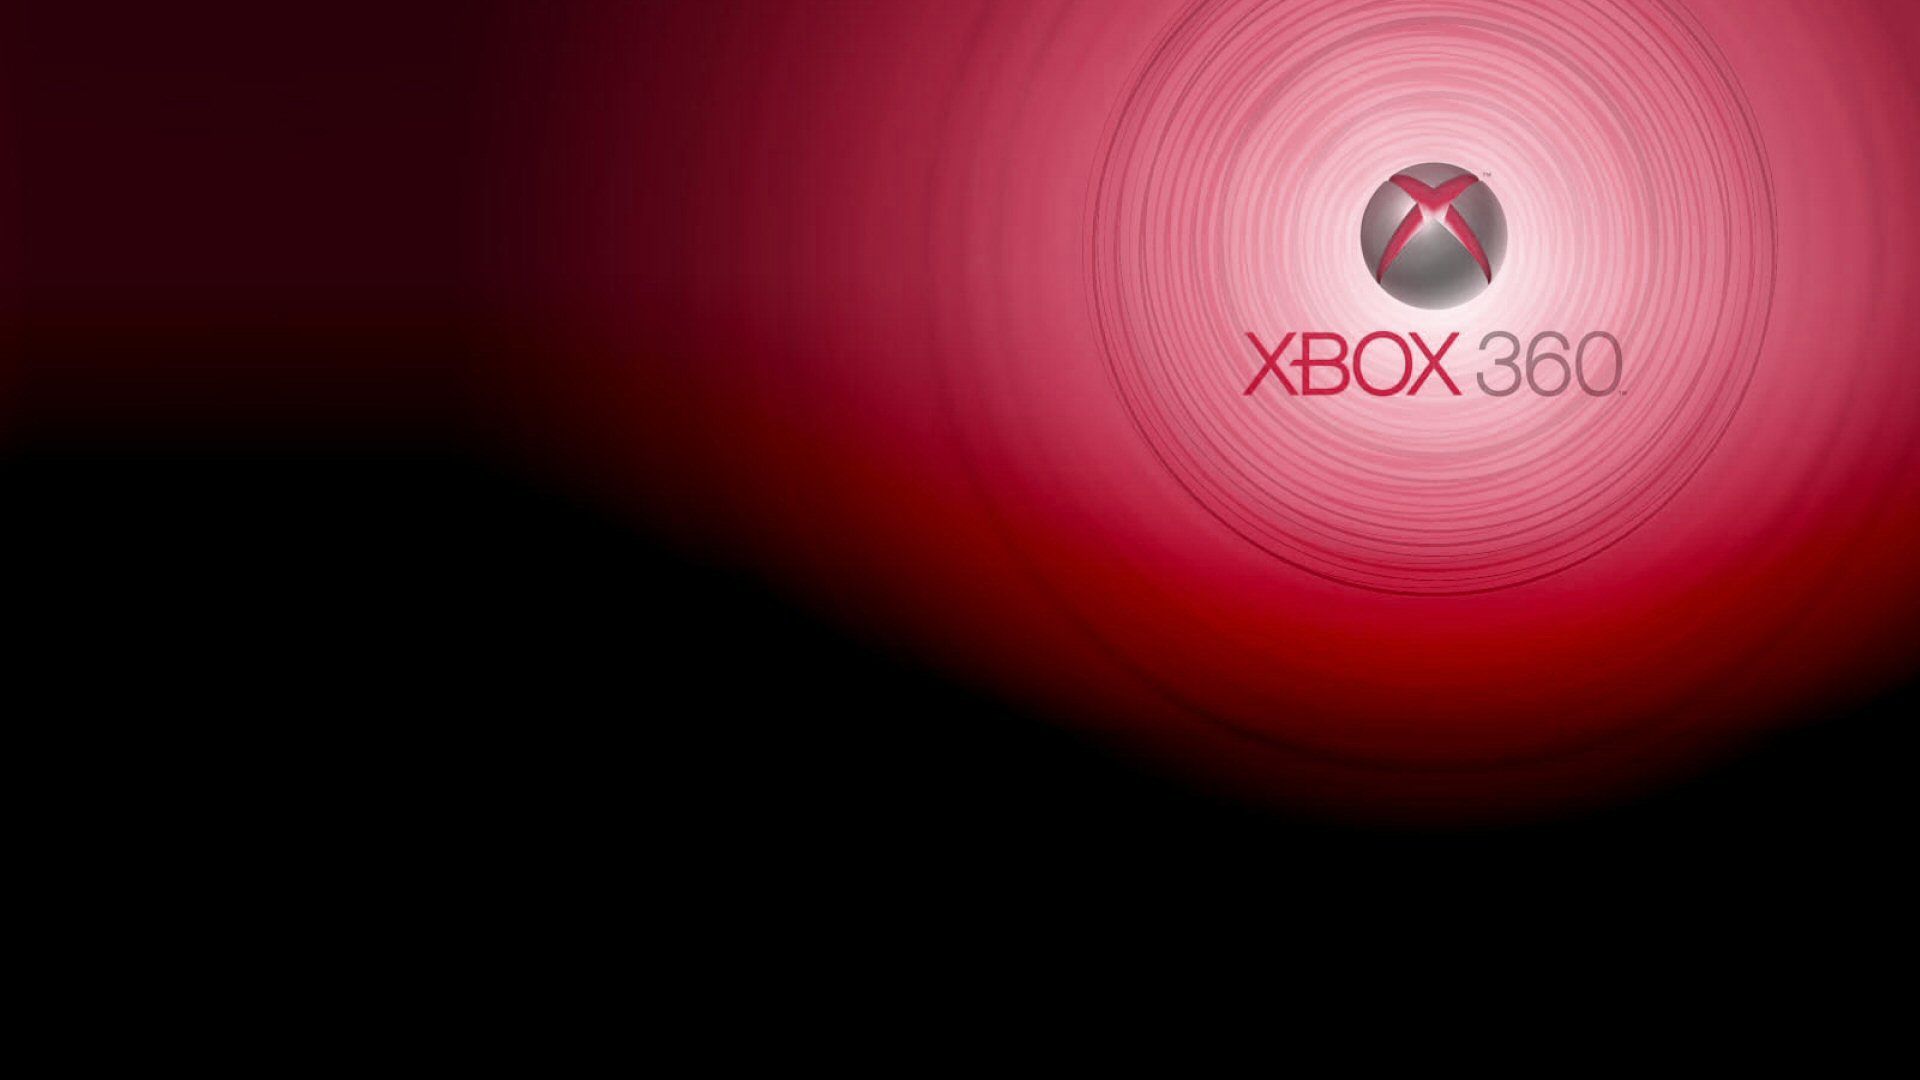 Xbox Red Wallpaper. Red Christmas Wallpaper, Red Victorian Wallpaper and Red Wallpaper